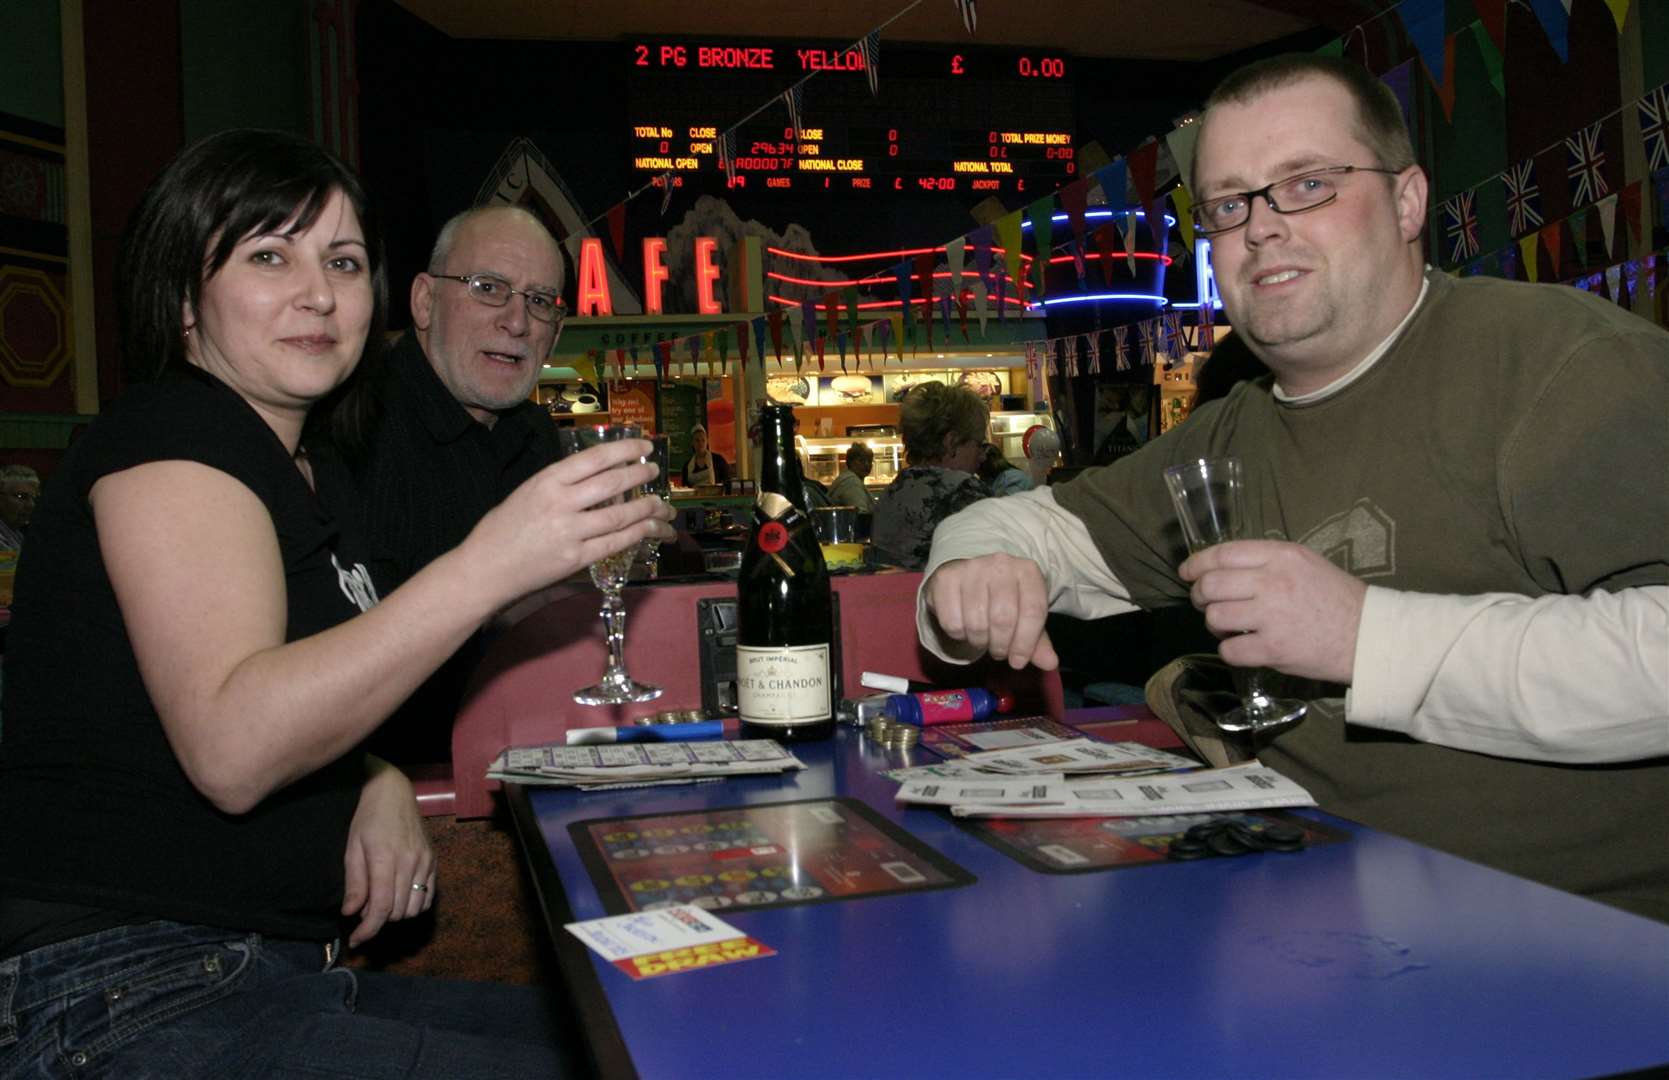 Janet Jackson enjoys an evening at Mecca Bingo in 2005 with husband Tony and her dad Ted Webb